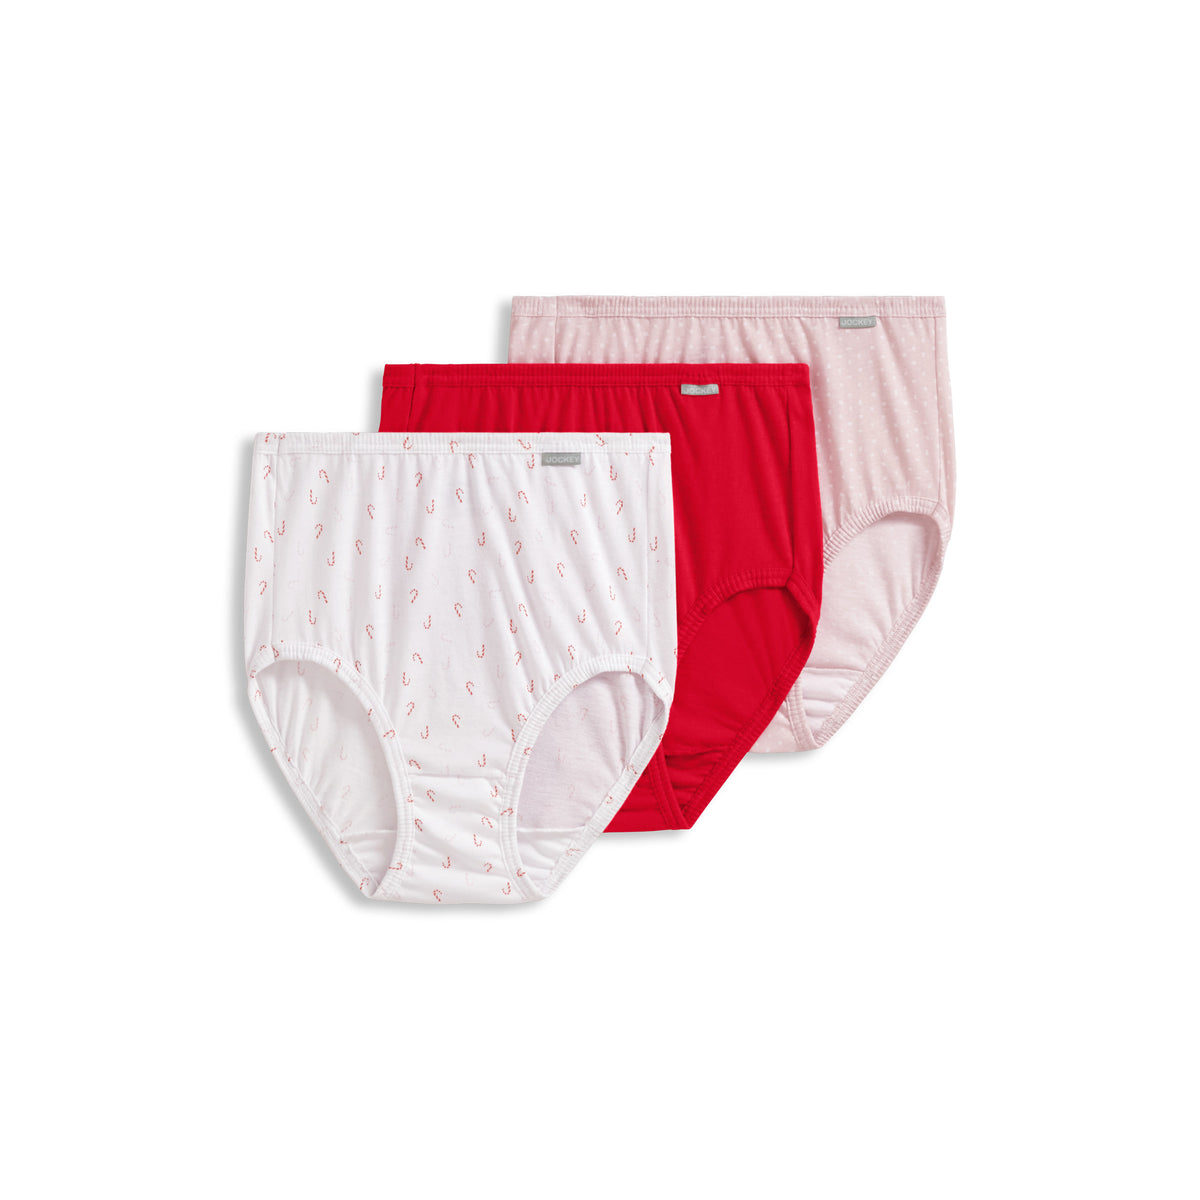 Penny by Zivame Women's Brief Pack of 3 from Rs.240